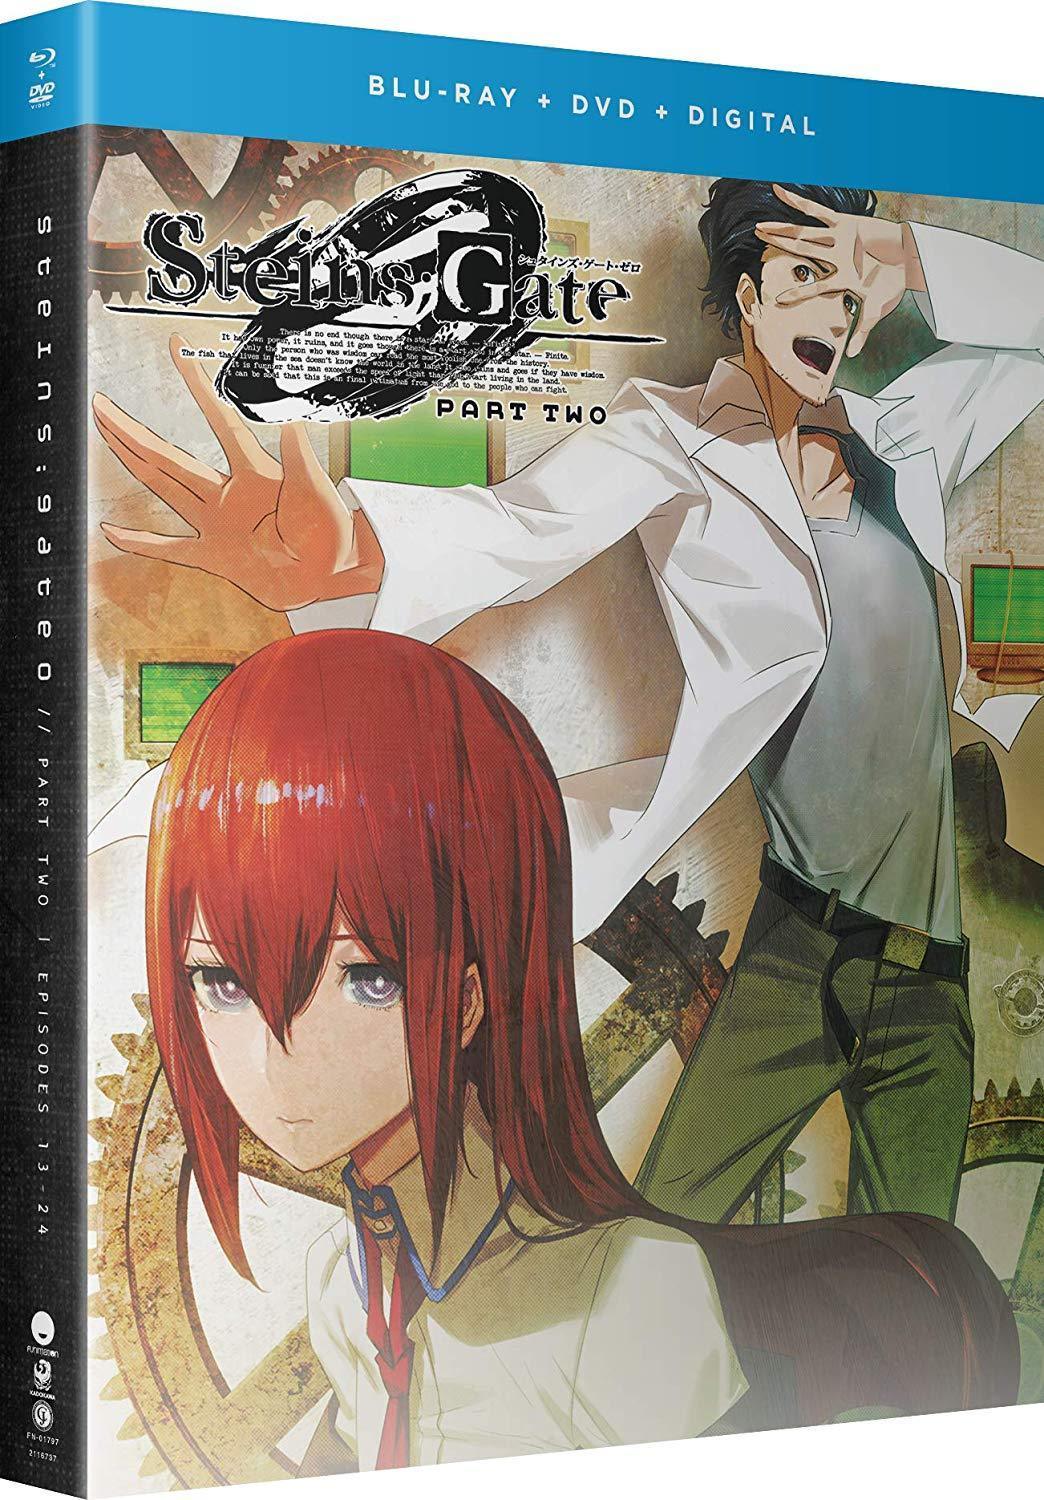 Steins;Gate 0 - Part 2 Blu-ray + DVD image count 1